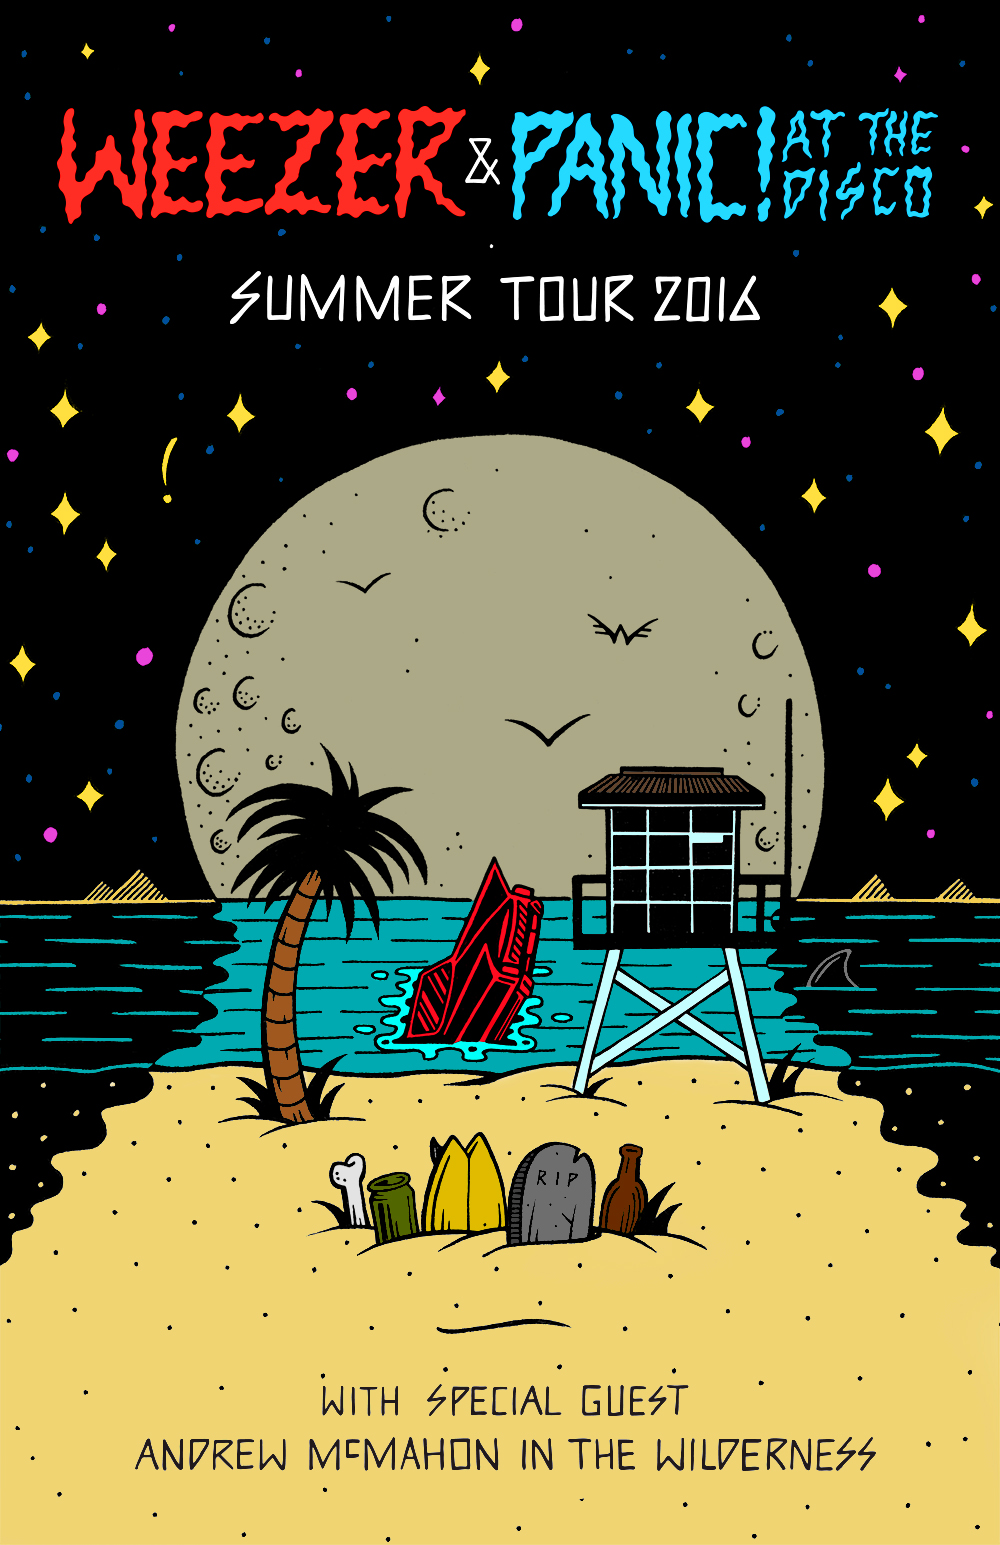 WEEZER and PANIC! AT THE DISCO ANNOUNCE 2016 SUMMER TOUR